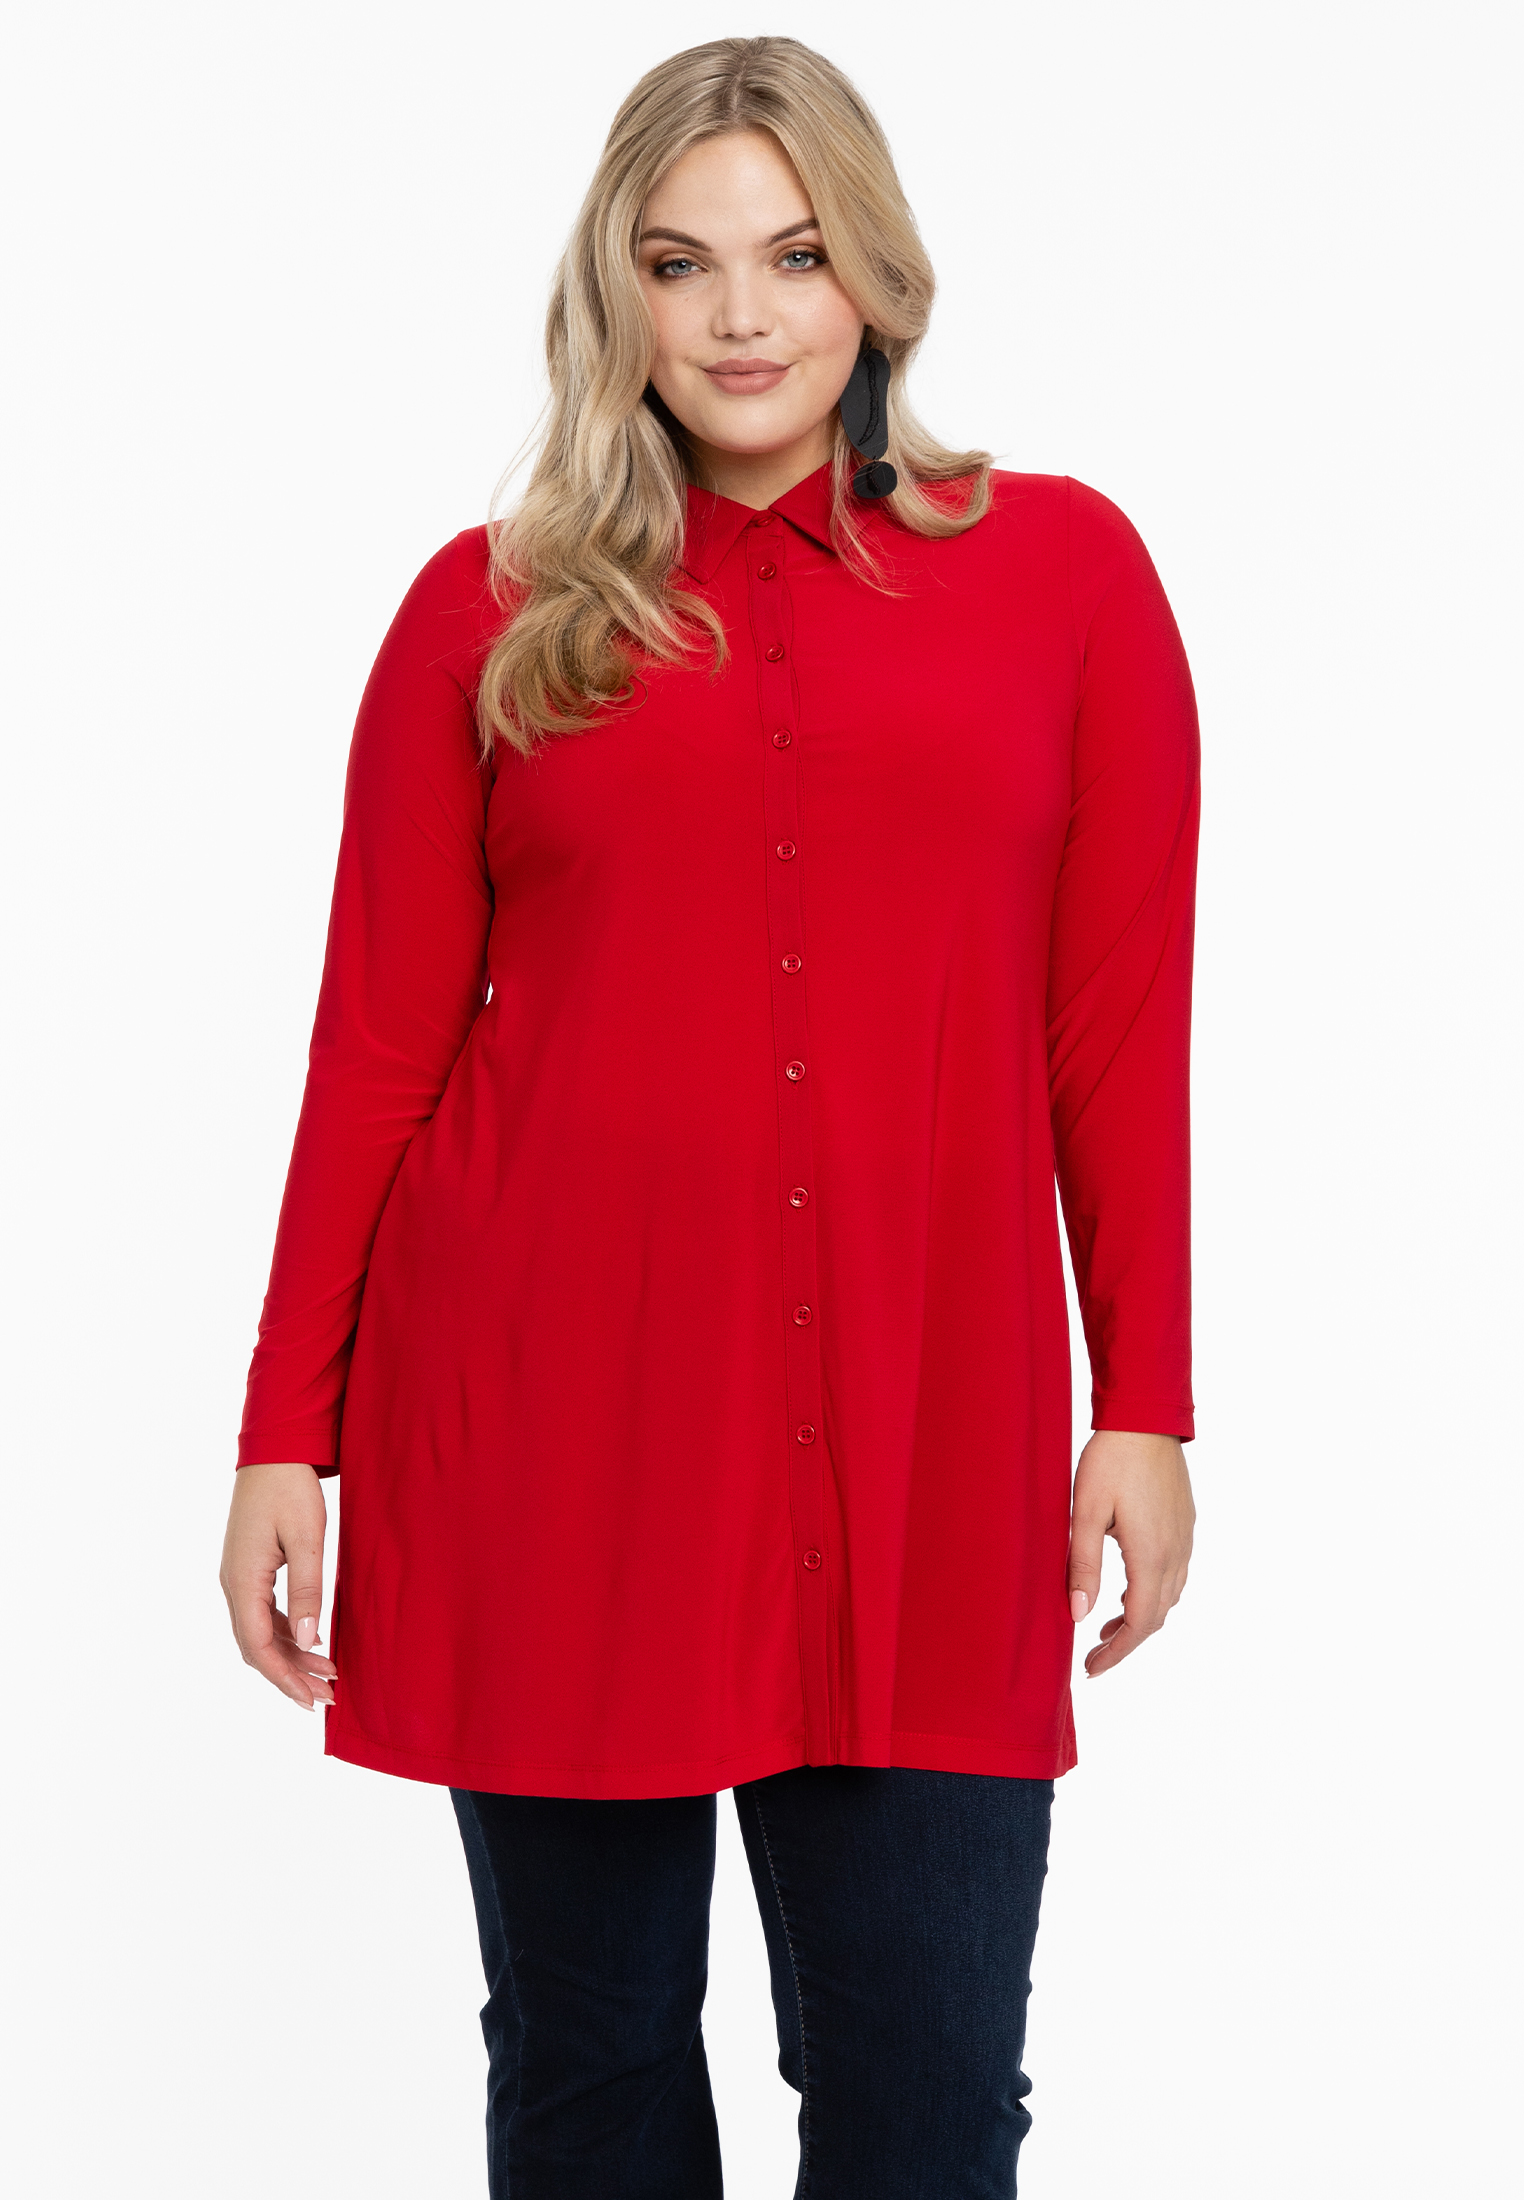 Blouse DOLCE 50/52 red